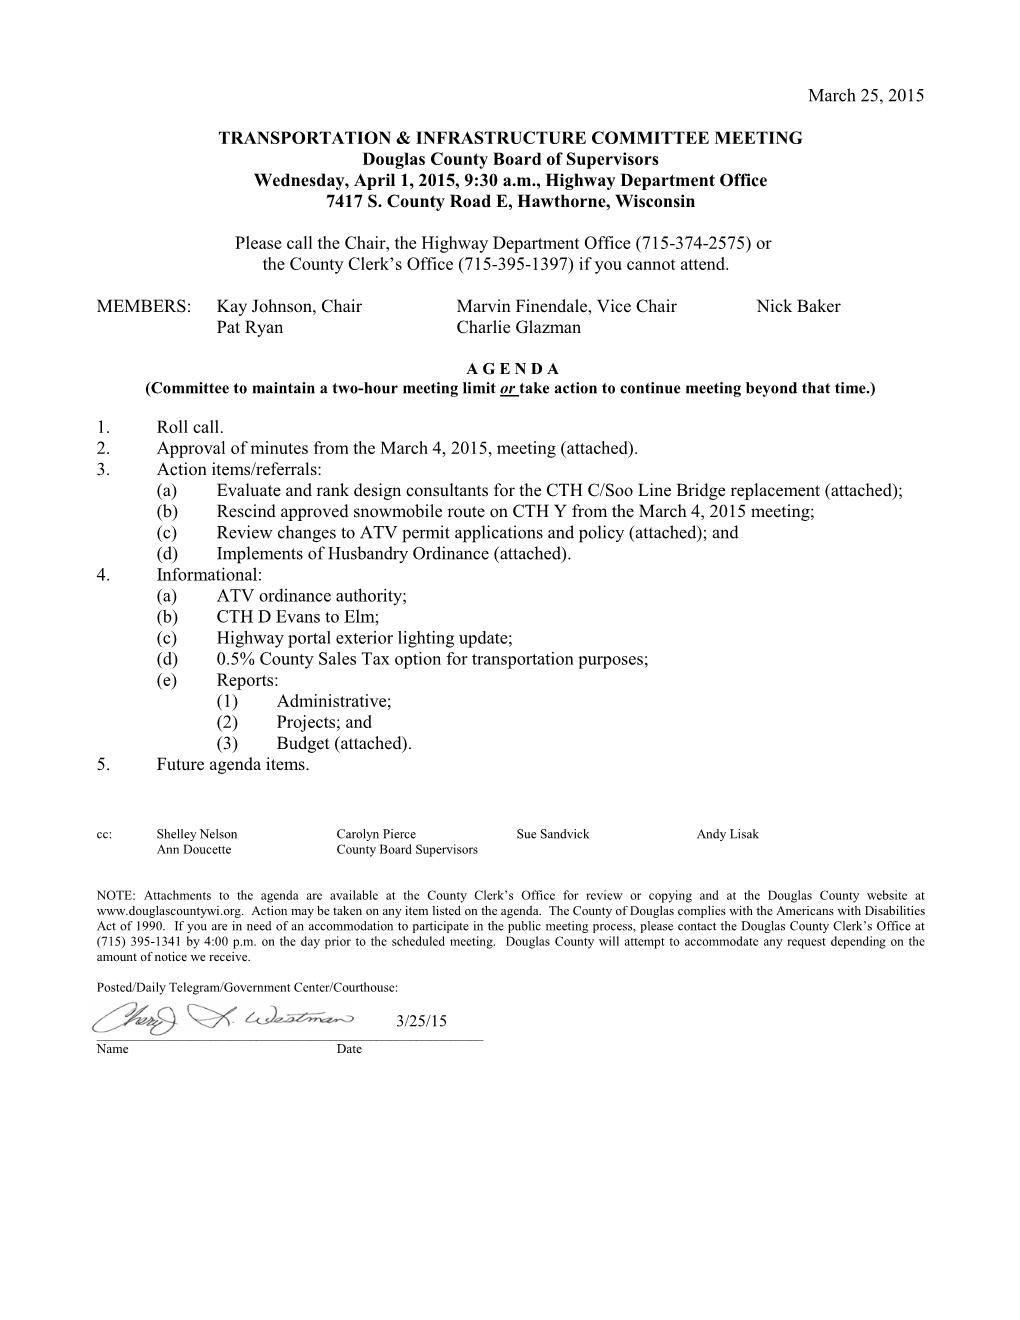 March 25, 2015 TRANSPORTATION & INFRASTRUCTURE COMMITTEE MEETING Douglas County Board of Supervisors Wednesday, April 1